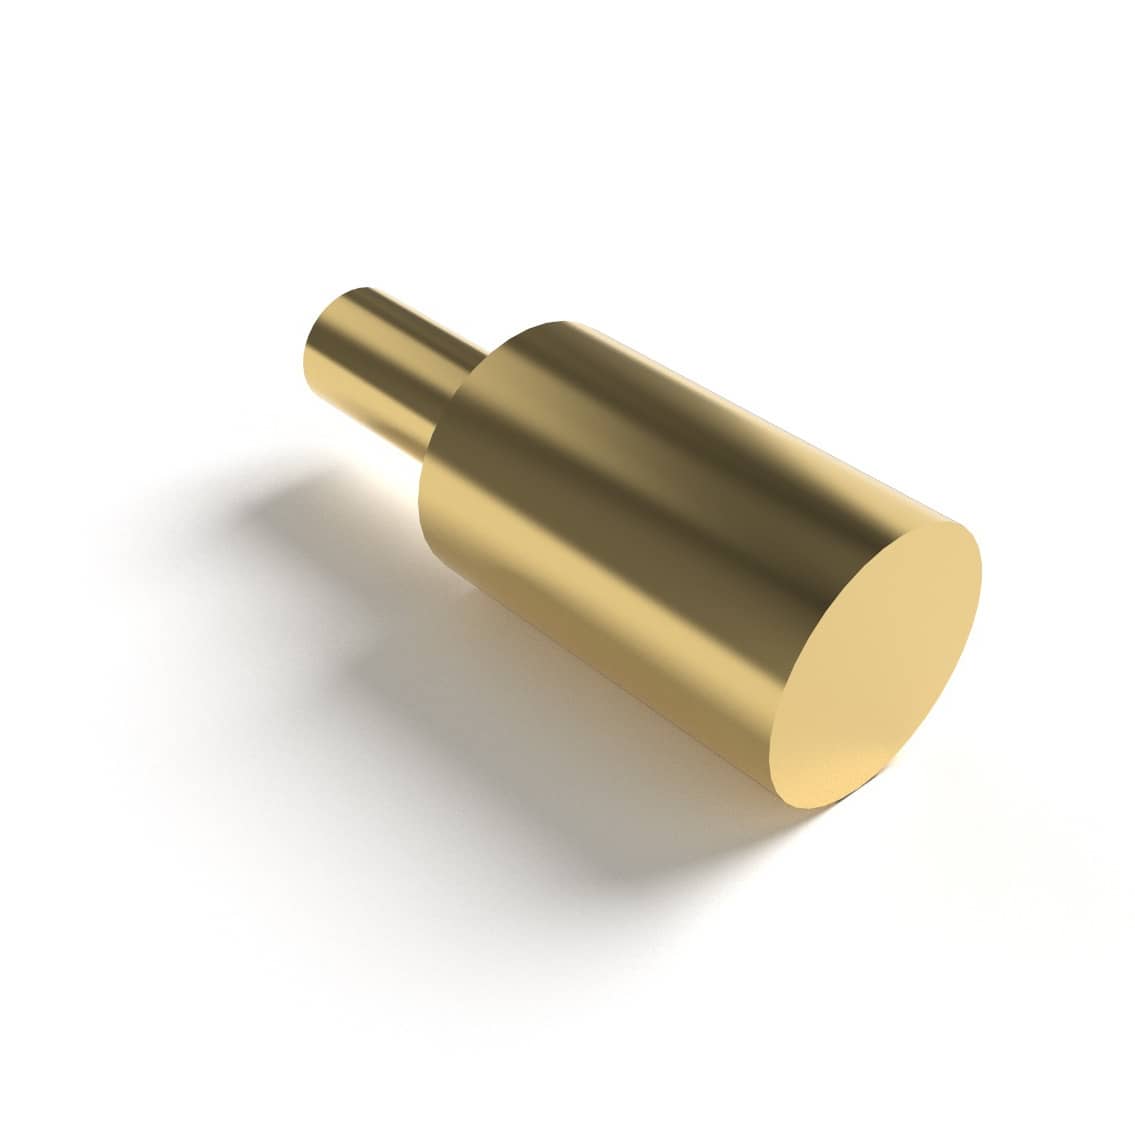 Female Machining Pin with Gold Landing Pad, 3mm